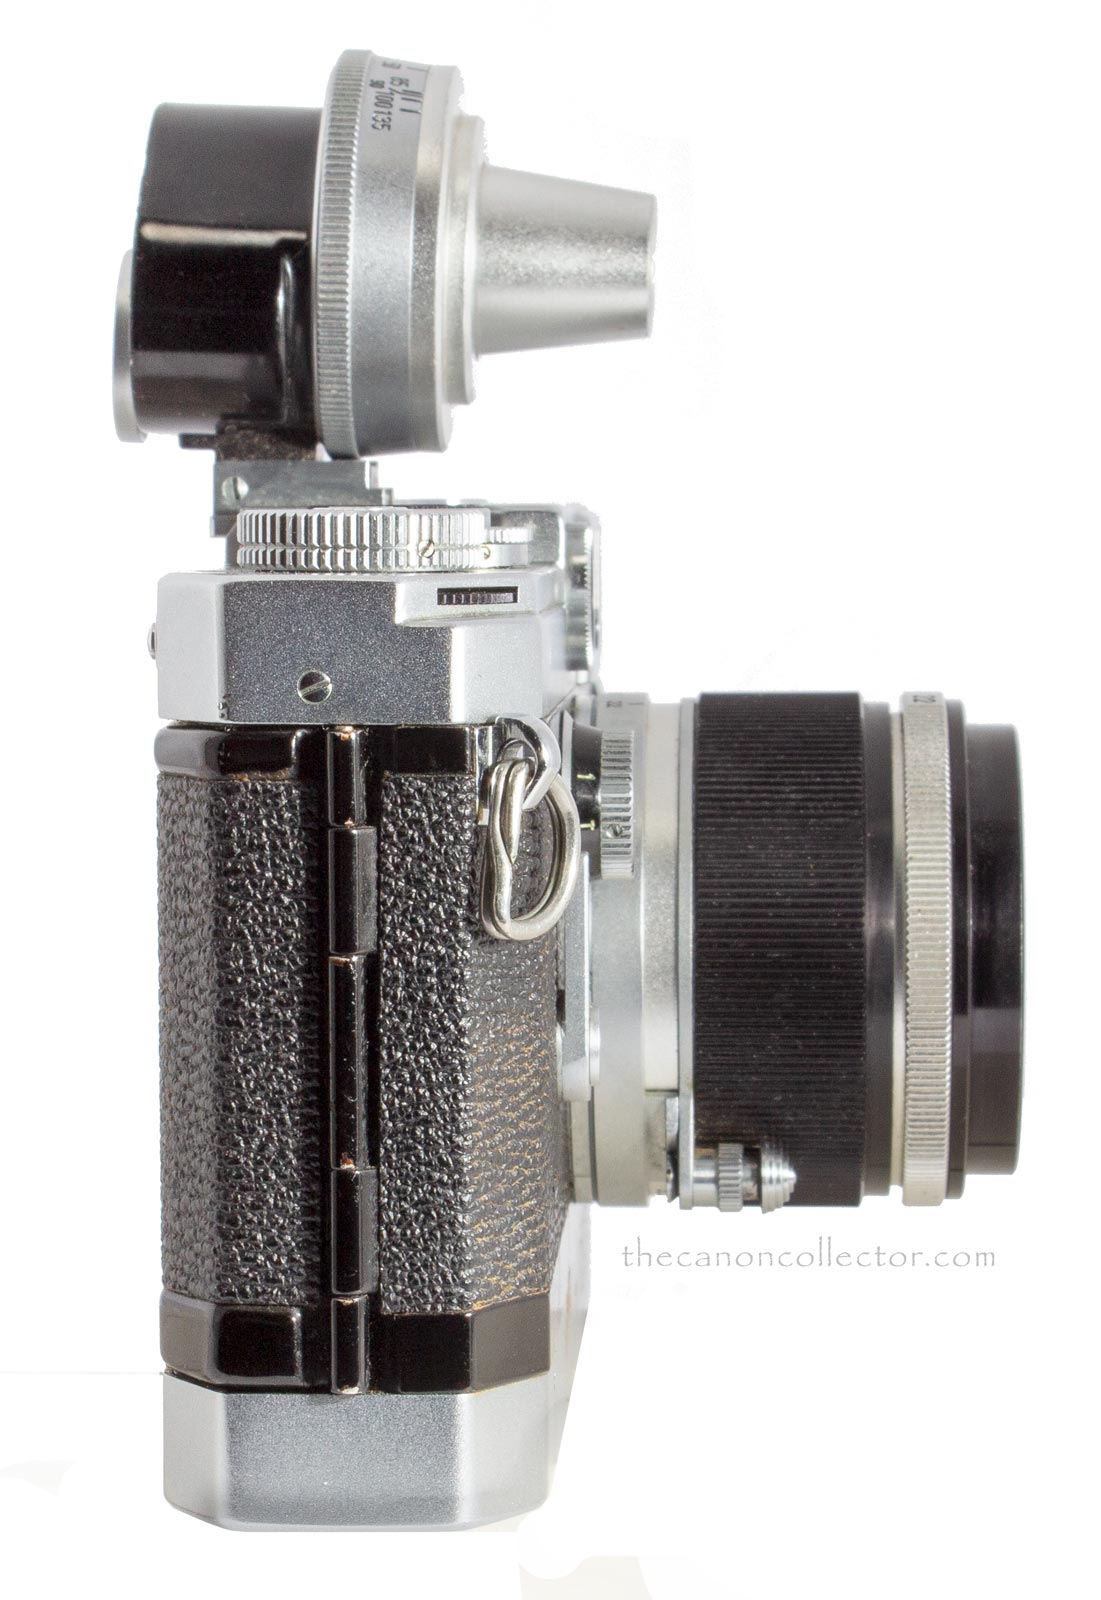 Canon Universal Viewfinder